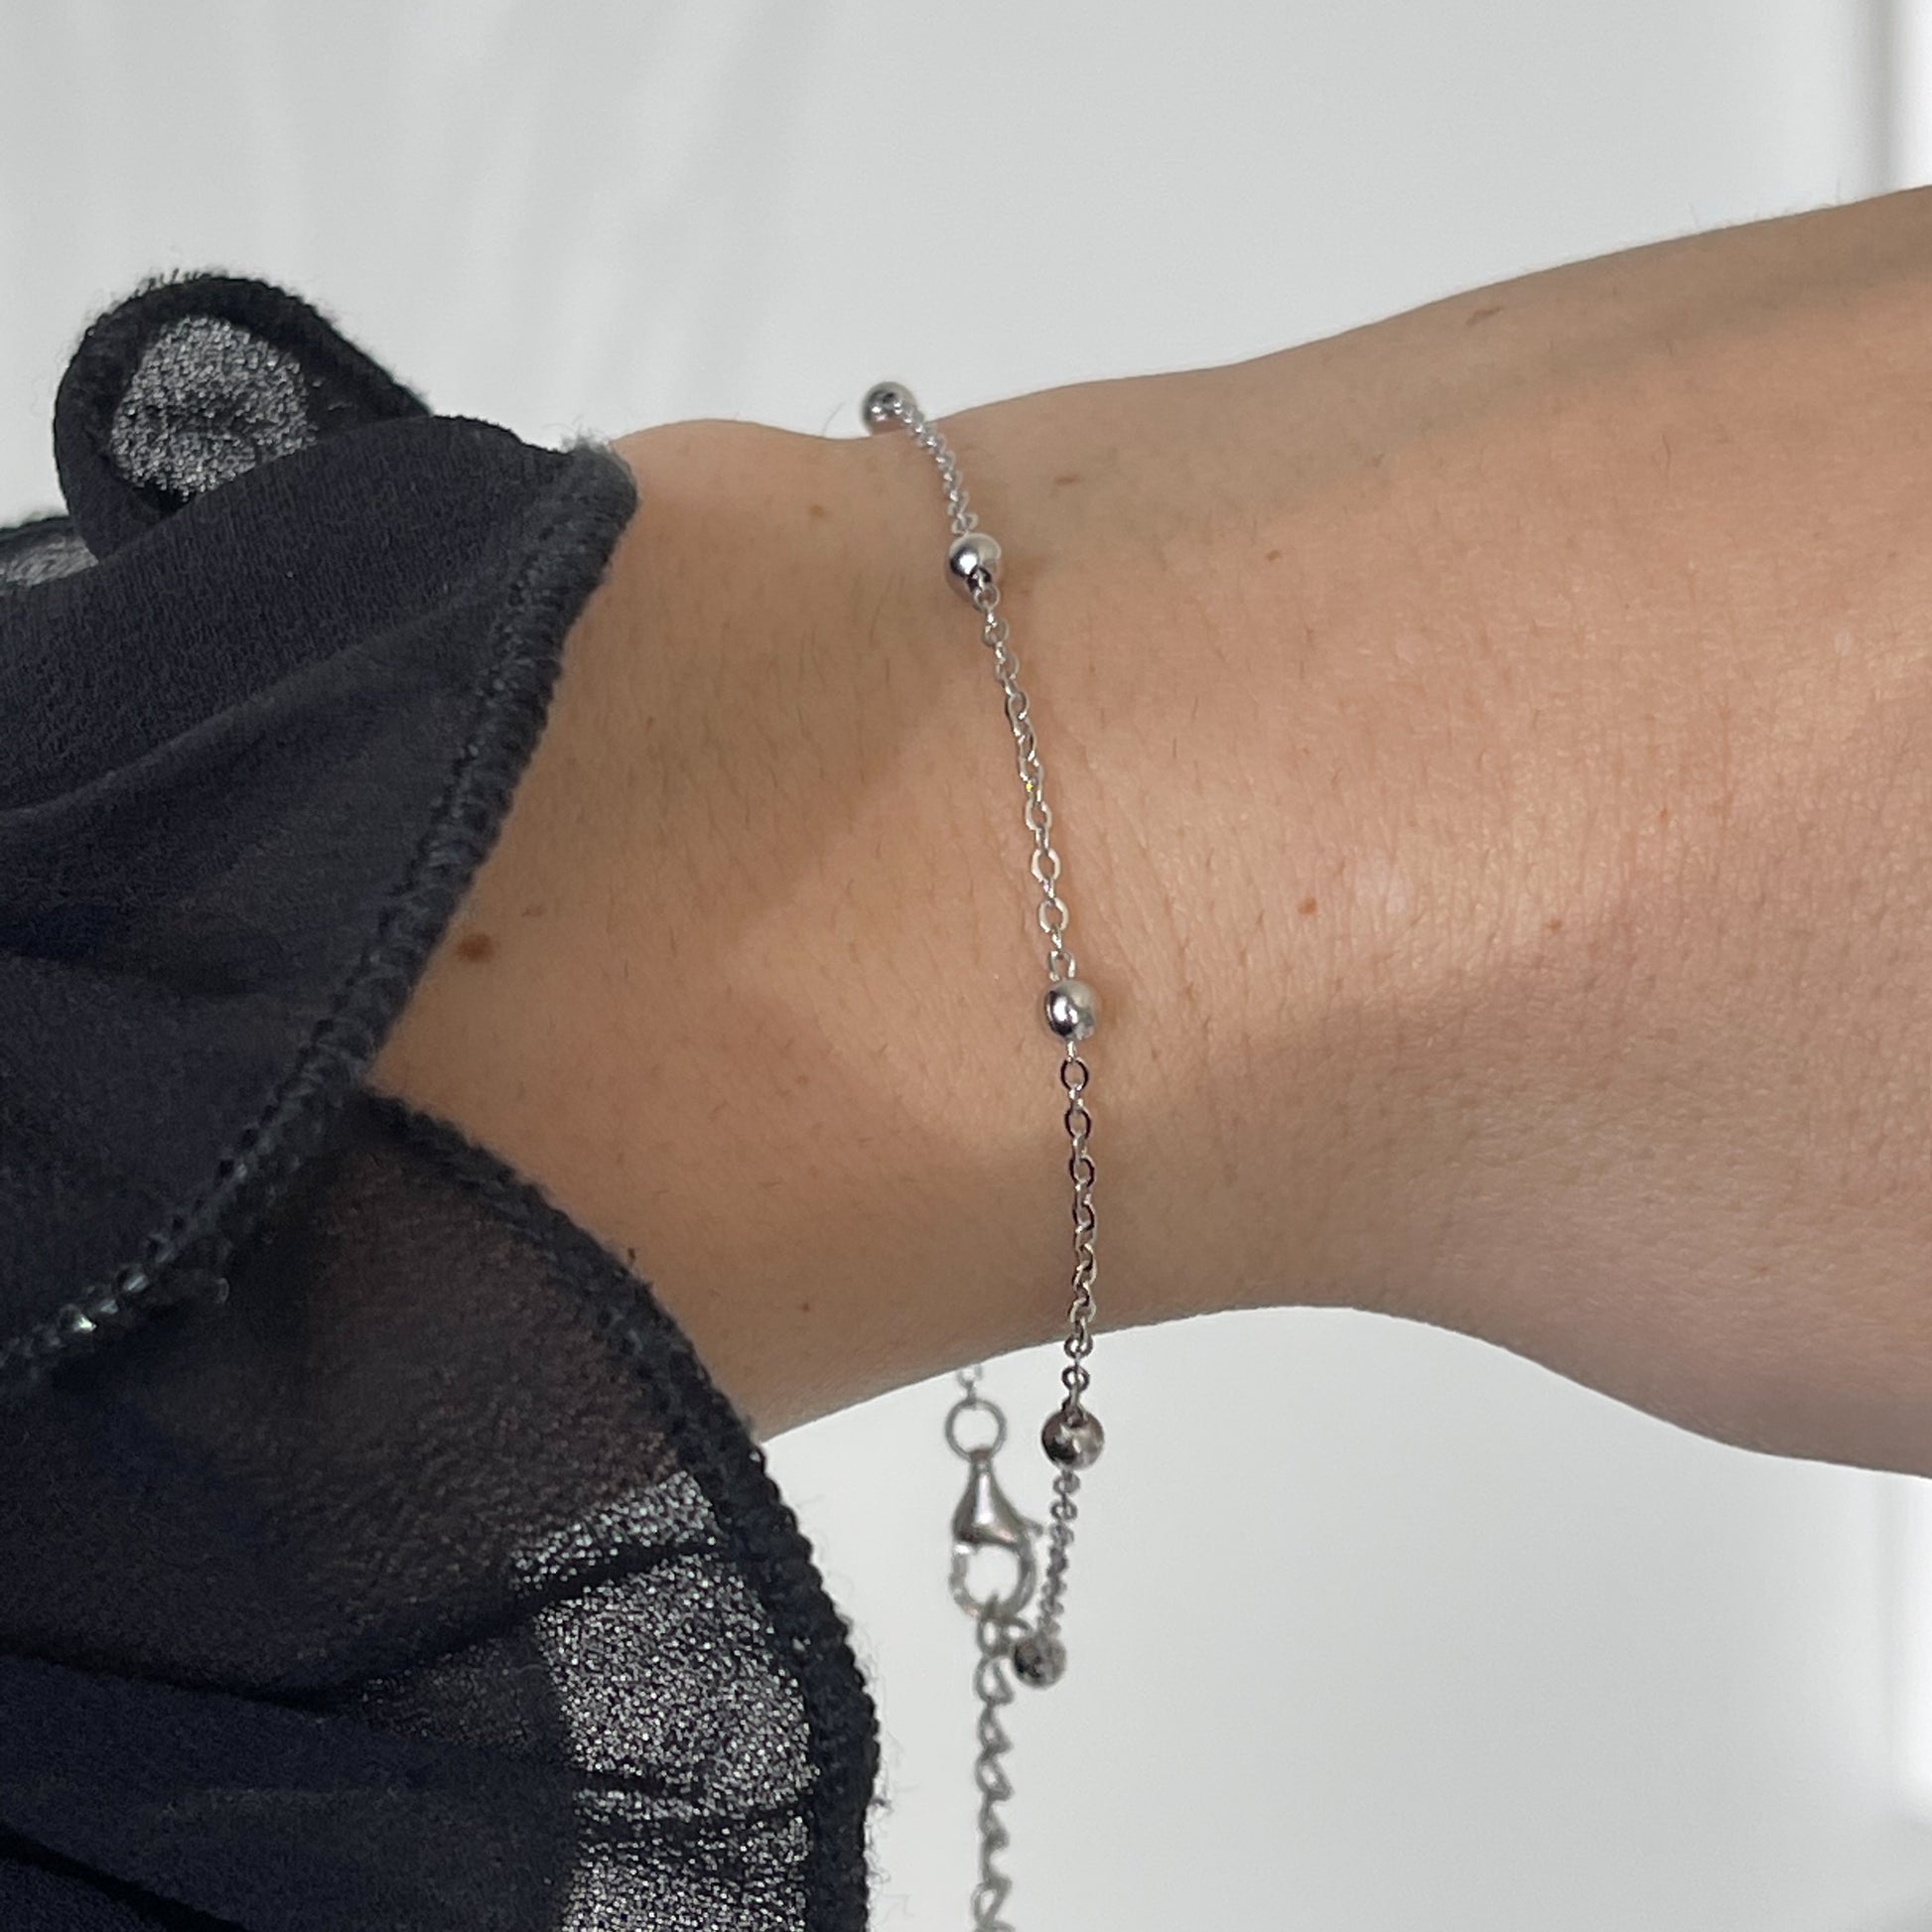 Dainty Sterling Silver Everyday Chain Bracelet | Women's Jewelry by Uncommon James